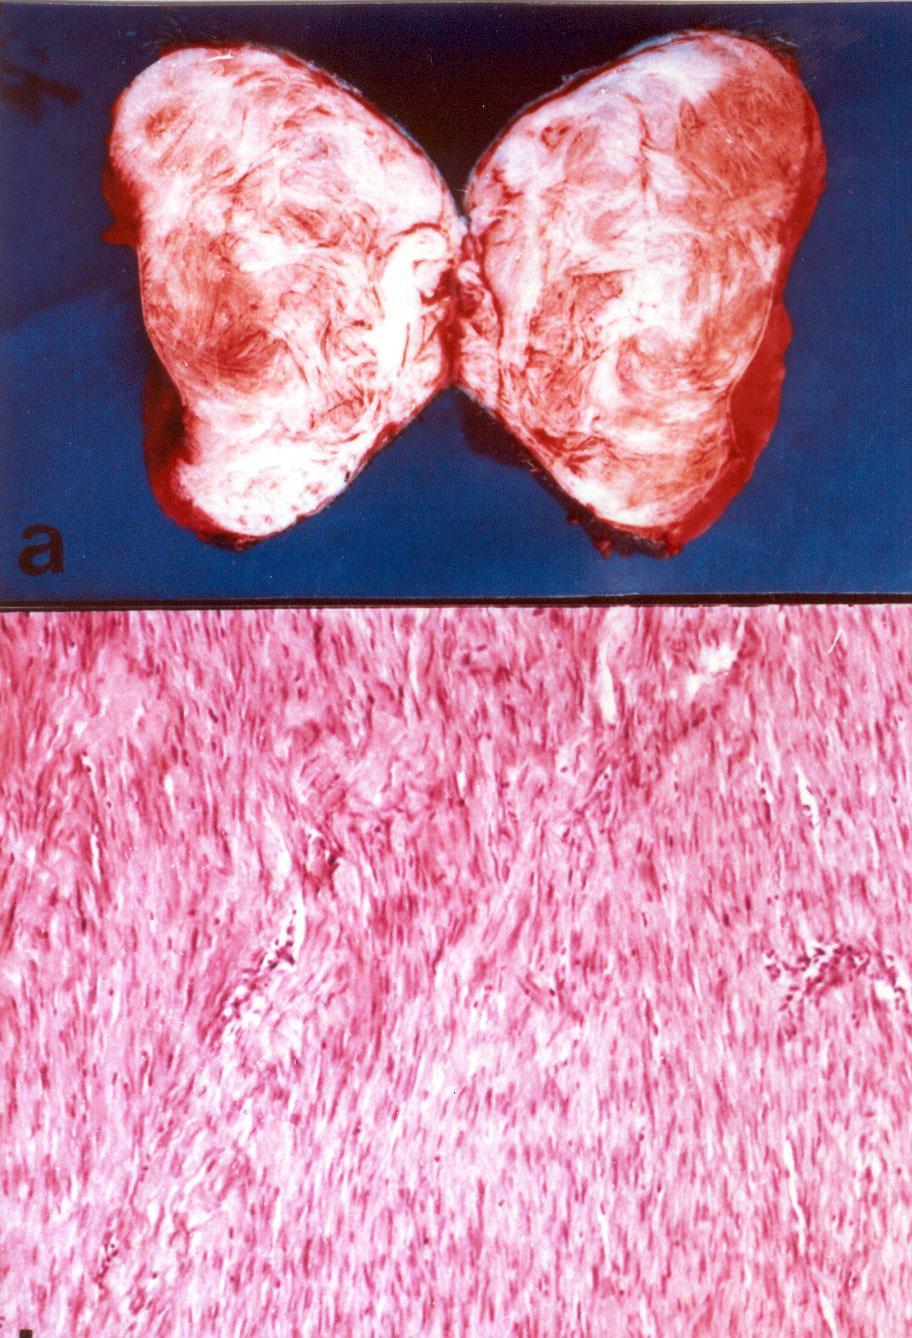 a (a) Cross section of the excised fibroma showing white wavy